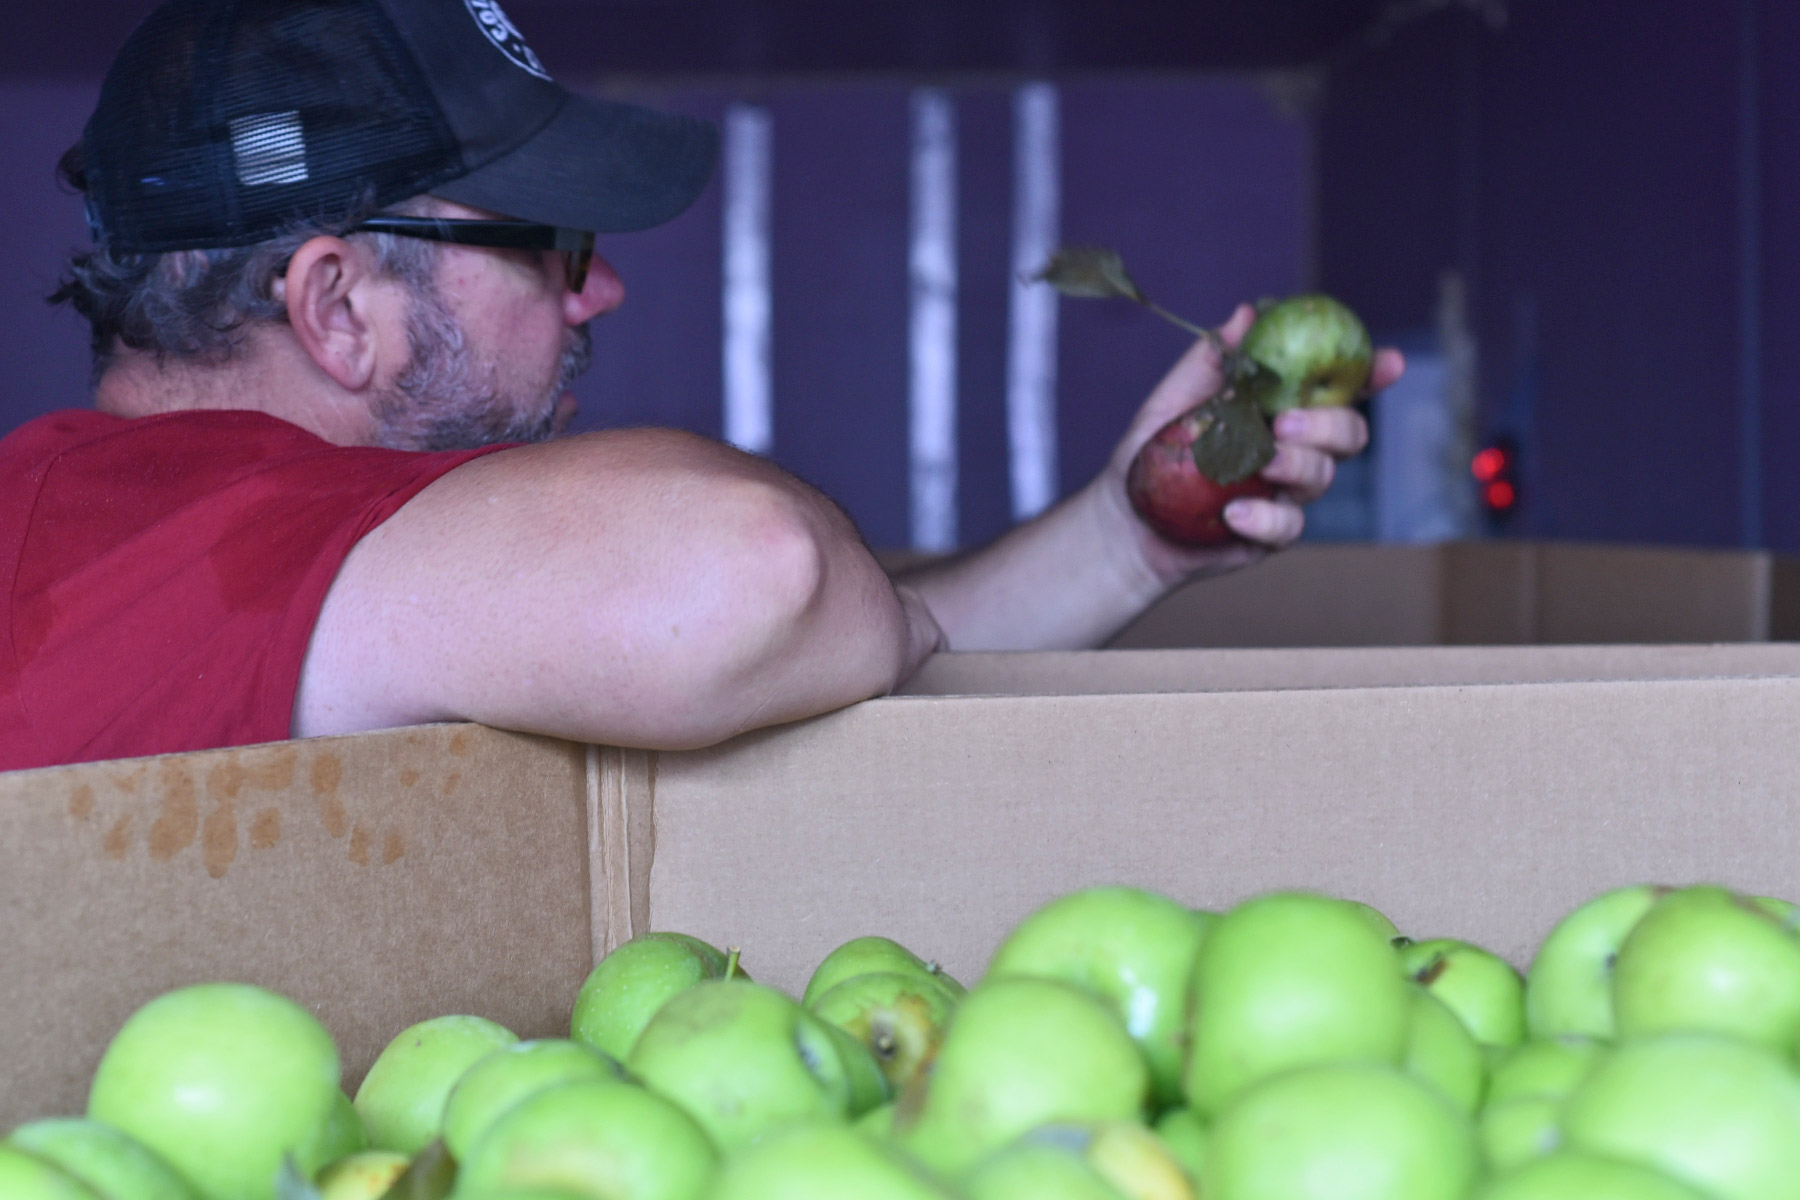 Eric Cioffi, co-owner of Courthouse Creek Cider, checking out the Northern Spy apples.